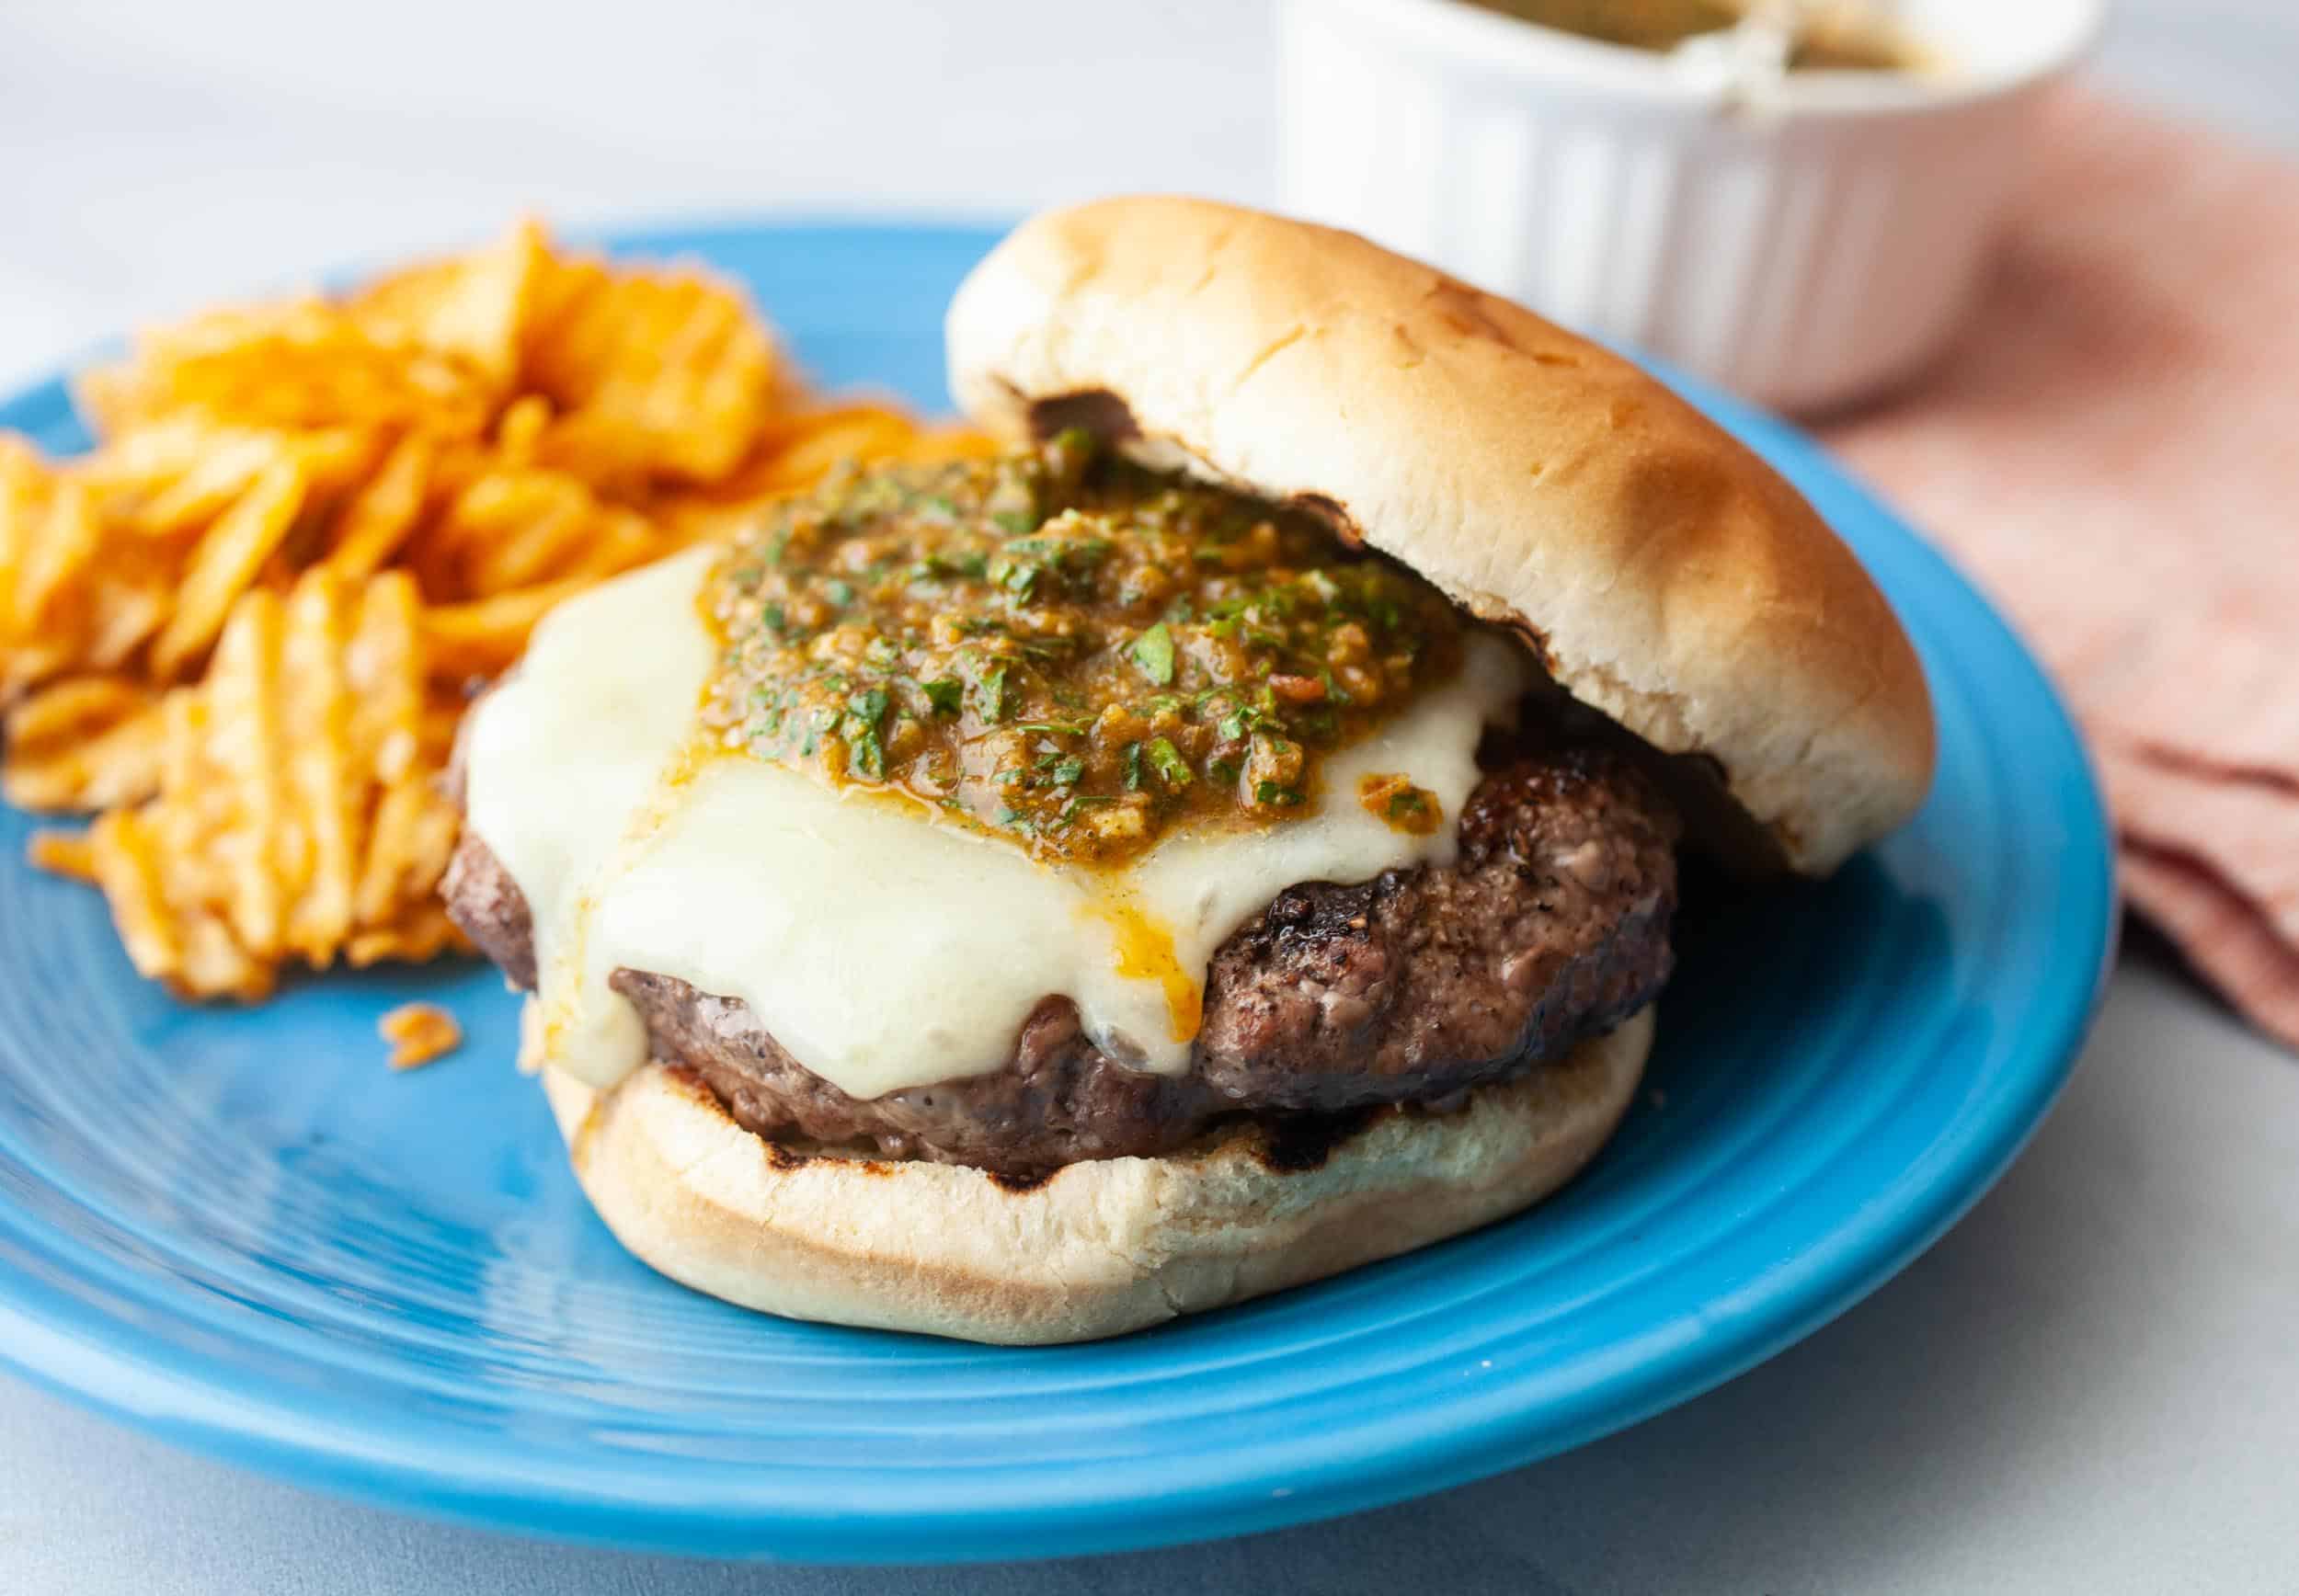 The Argentine Burger with Chimichurri Image